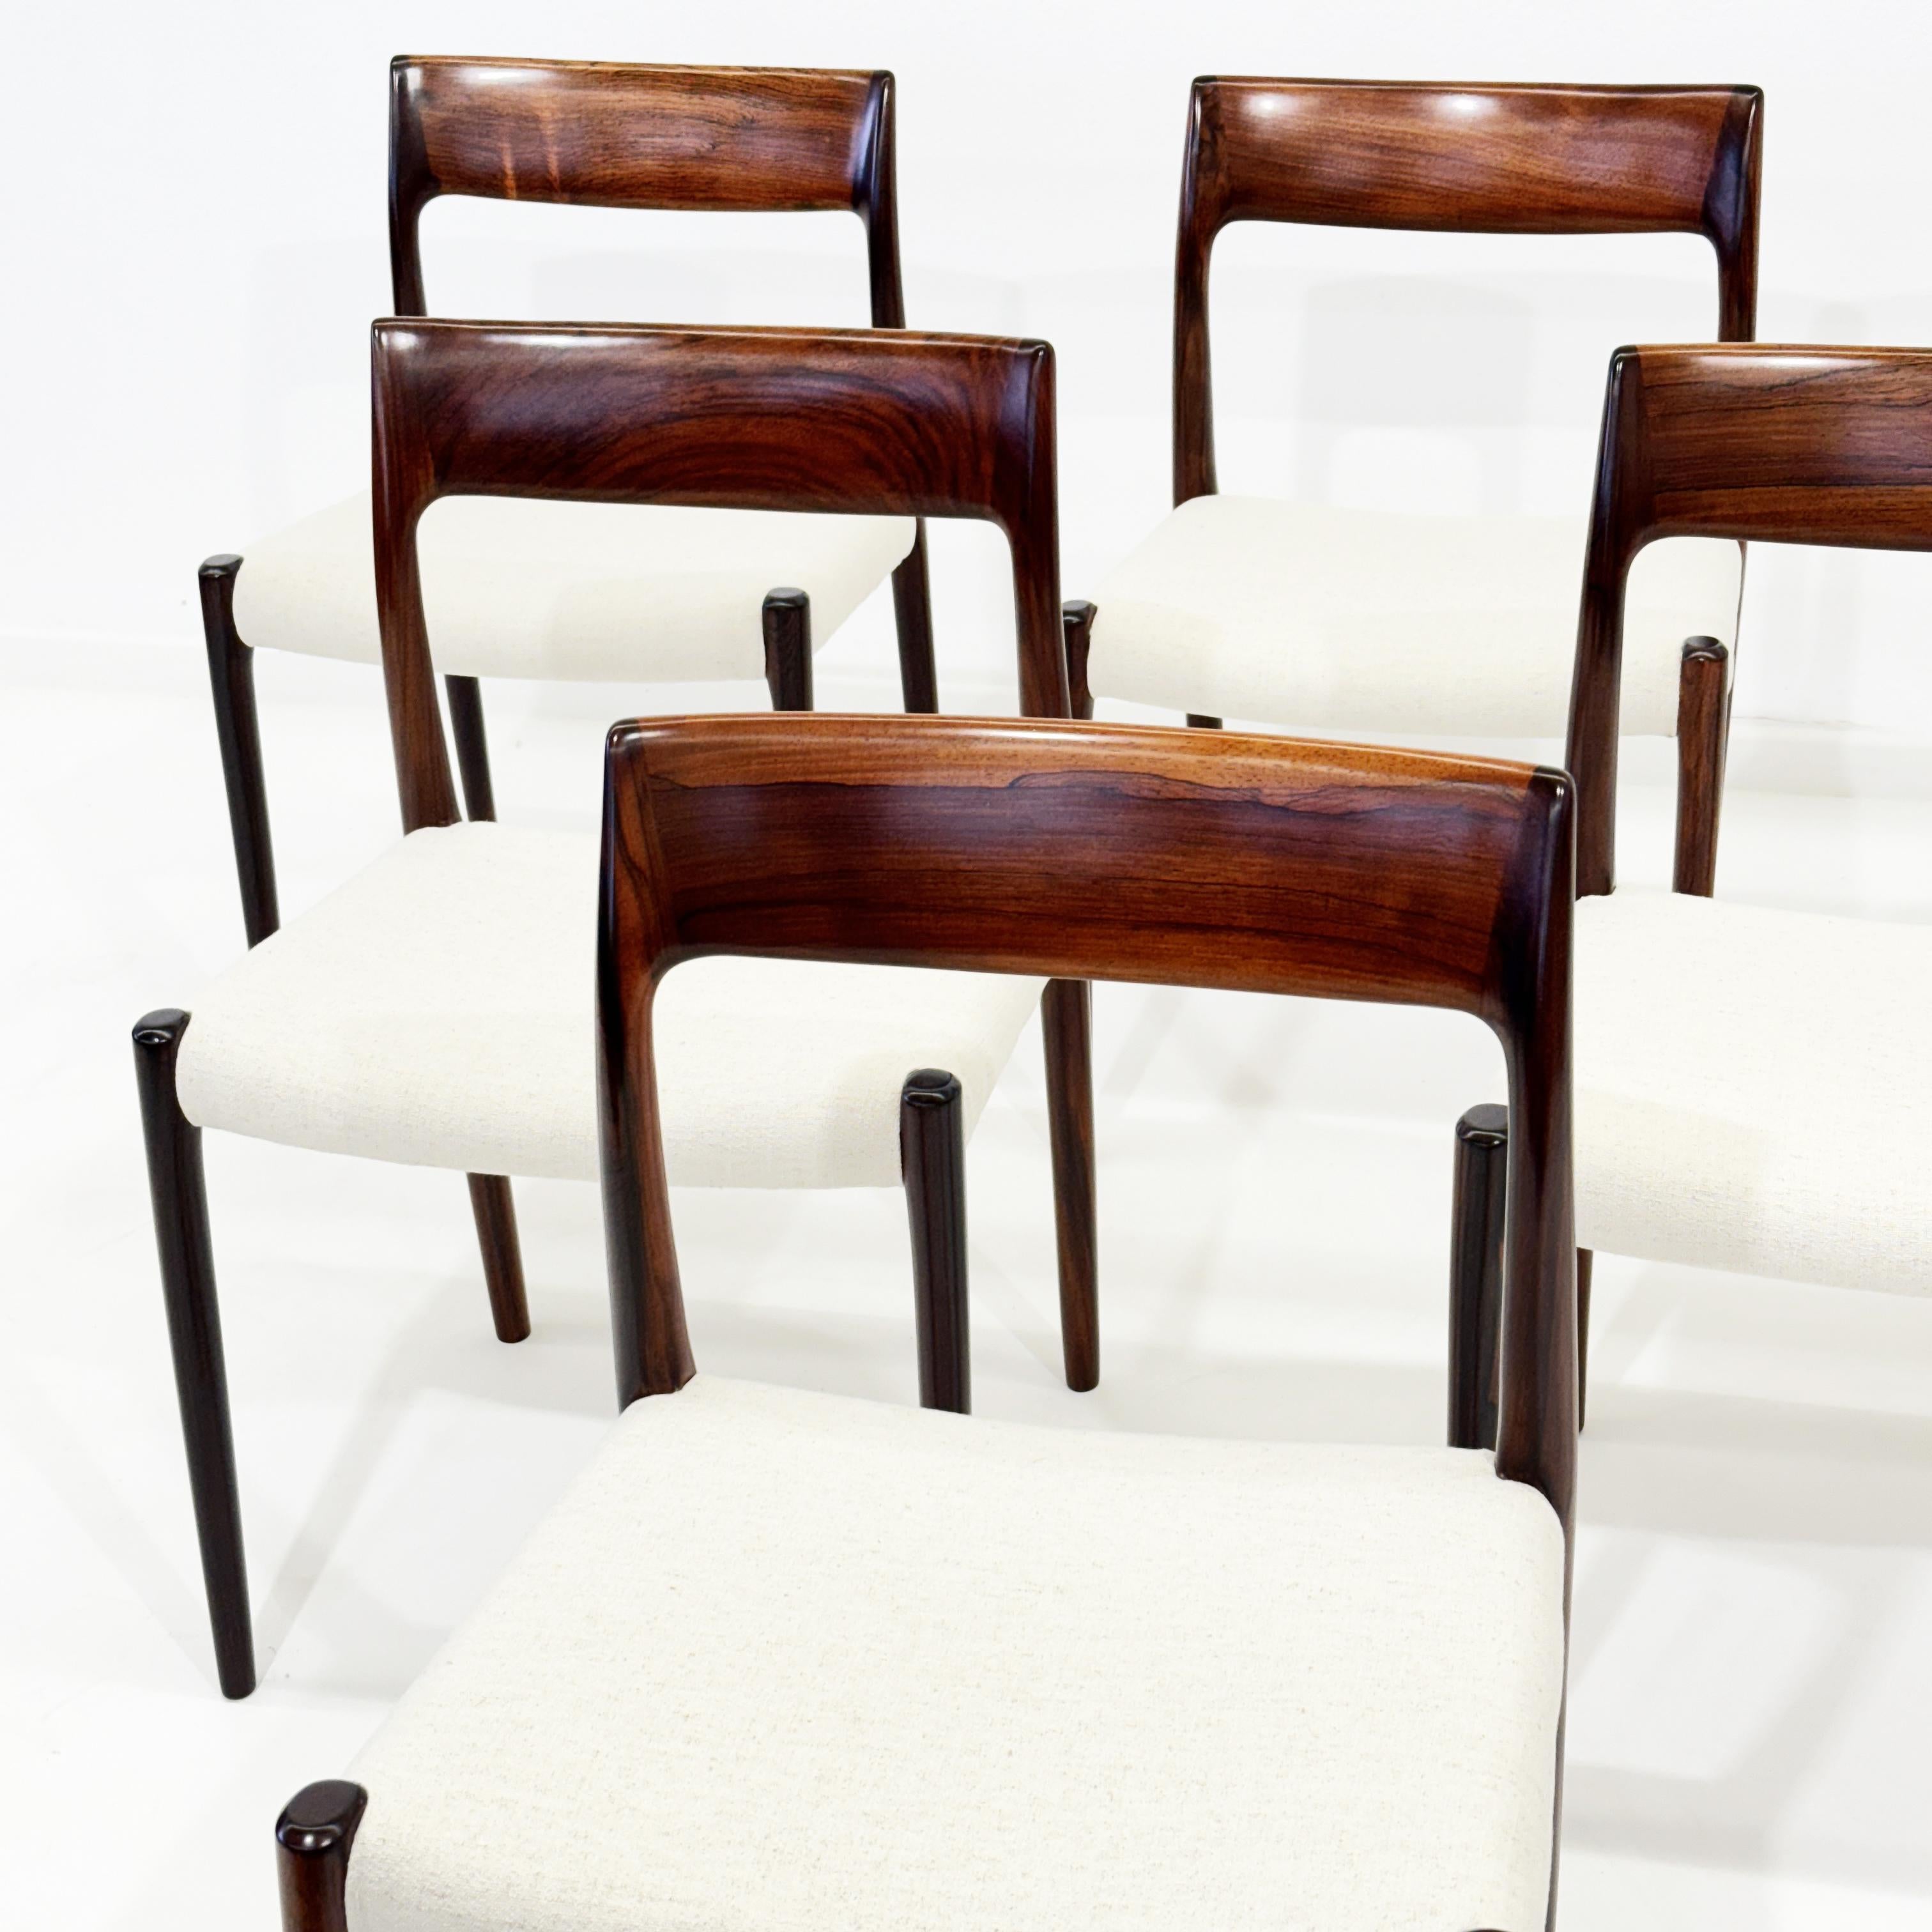 6 Niels Otto Møller model 77 in rosewood.
Produced by J.L. Moller Mobelfabrik, Denmark 1960s
The chairs are stamped by the producer.


The wood of the chairs has been professionally restored to its original characteristics and specifications. 
New